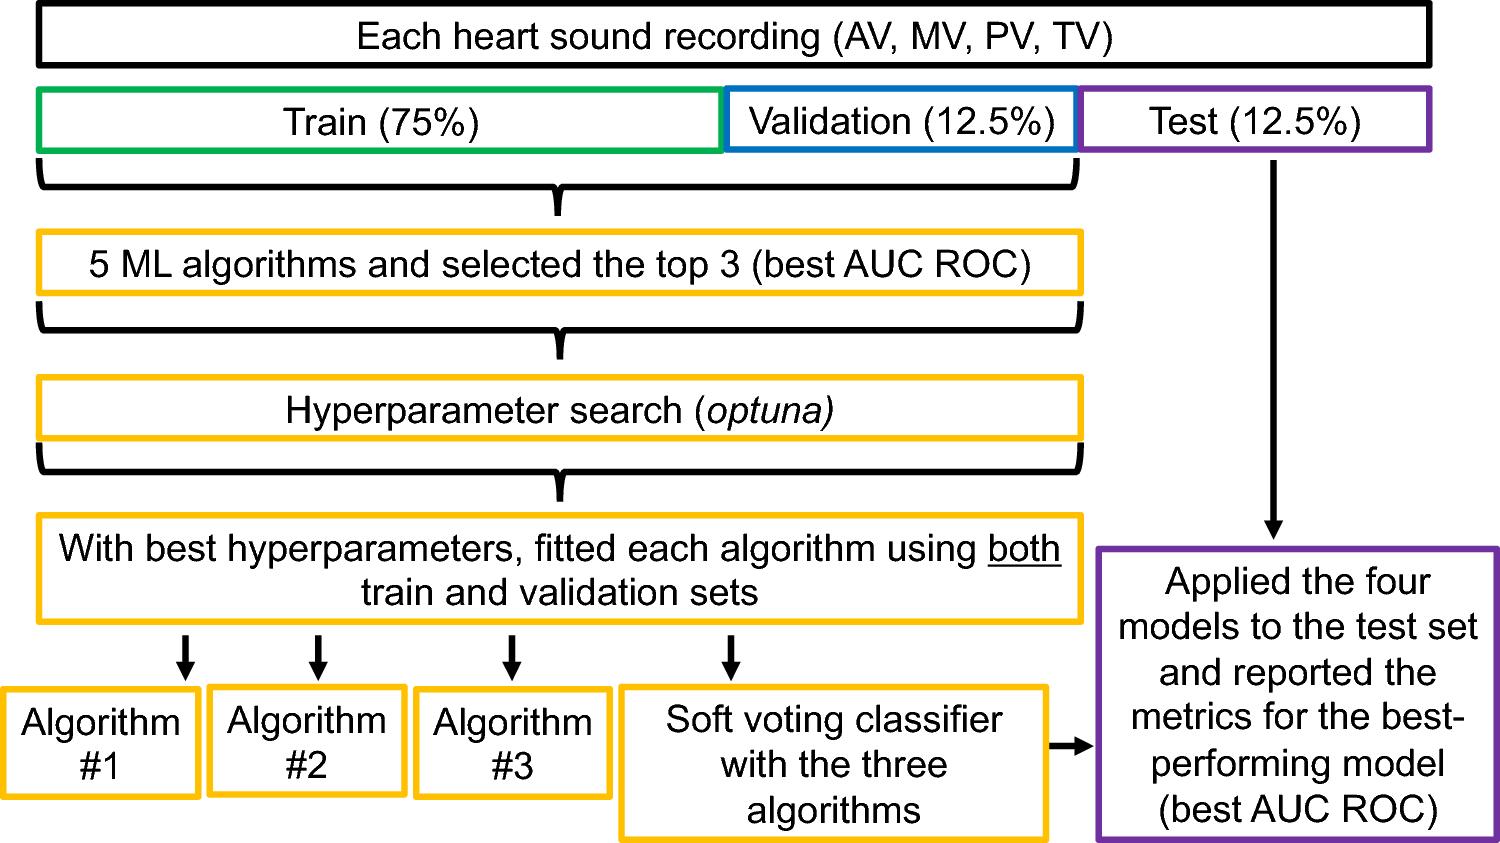 Recognition of Patient Gender: A Machine Learning Preliminary Analysis Using Heart Sounds from Children and Adolescents